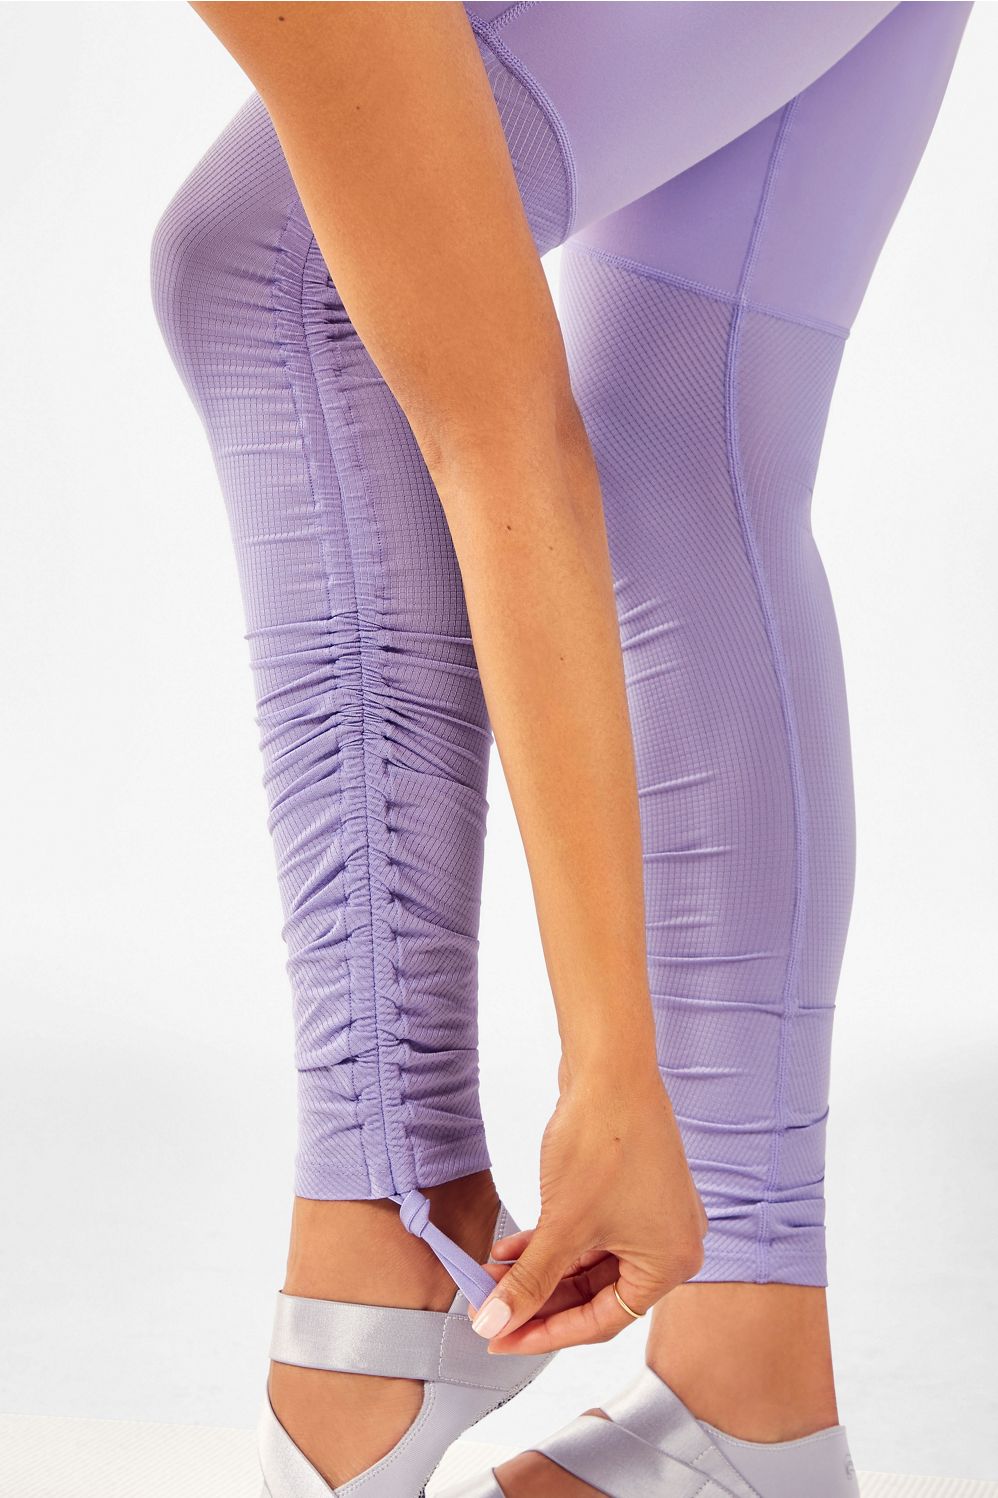 Fabletics Cashel Foldover Pureluxe Legging XS Pink Rouge Cinched